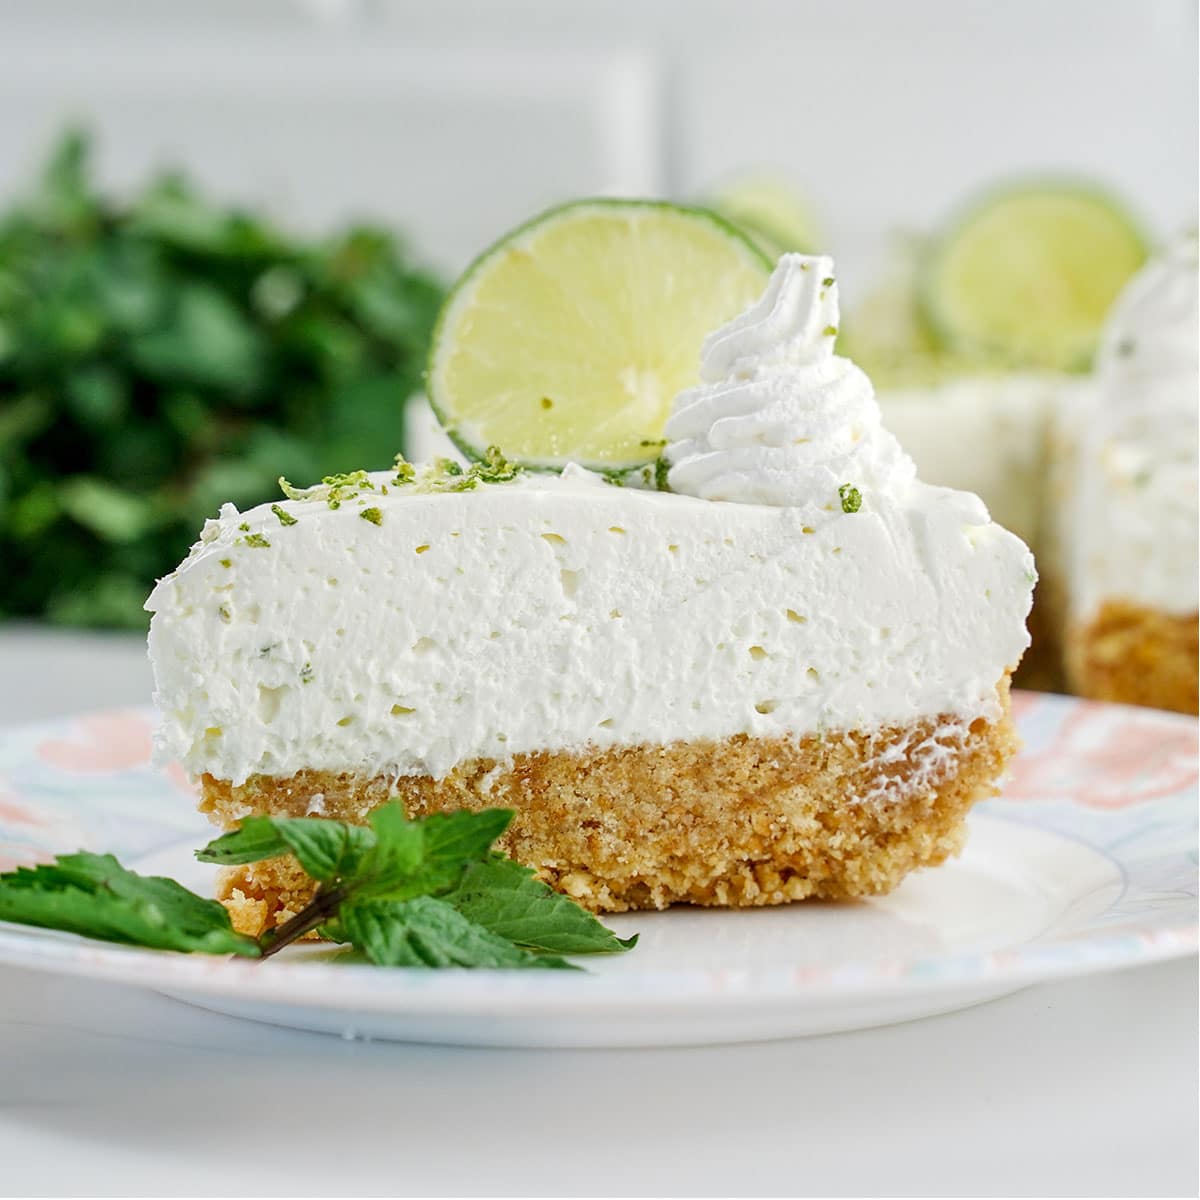 Fluffy, mouthwatering Key Lime Cheesecake.